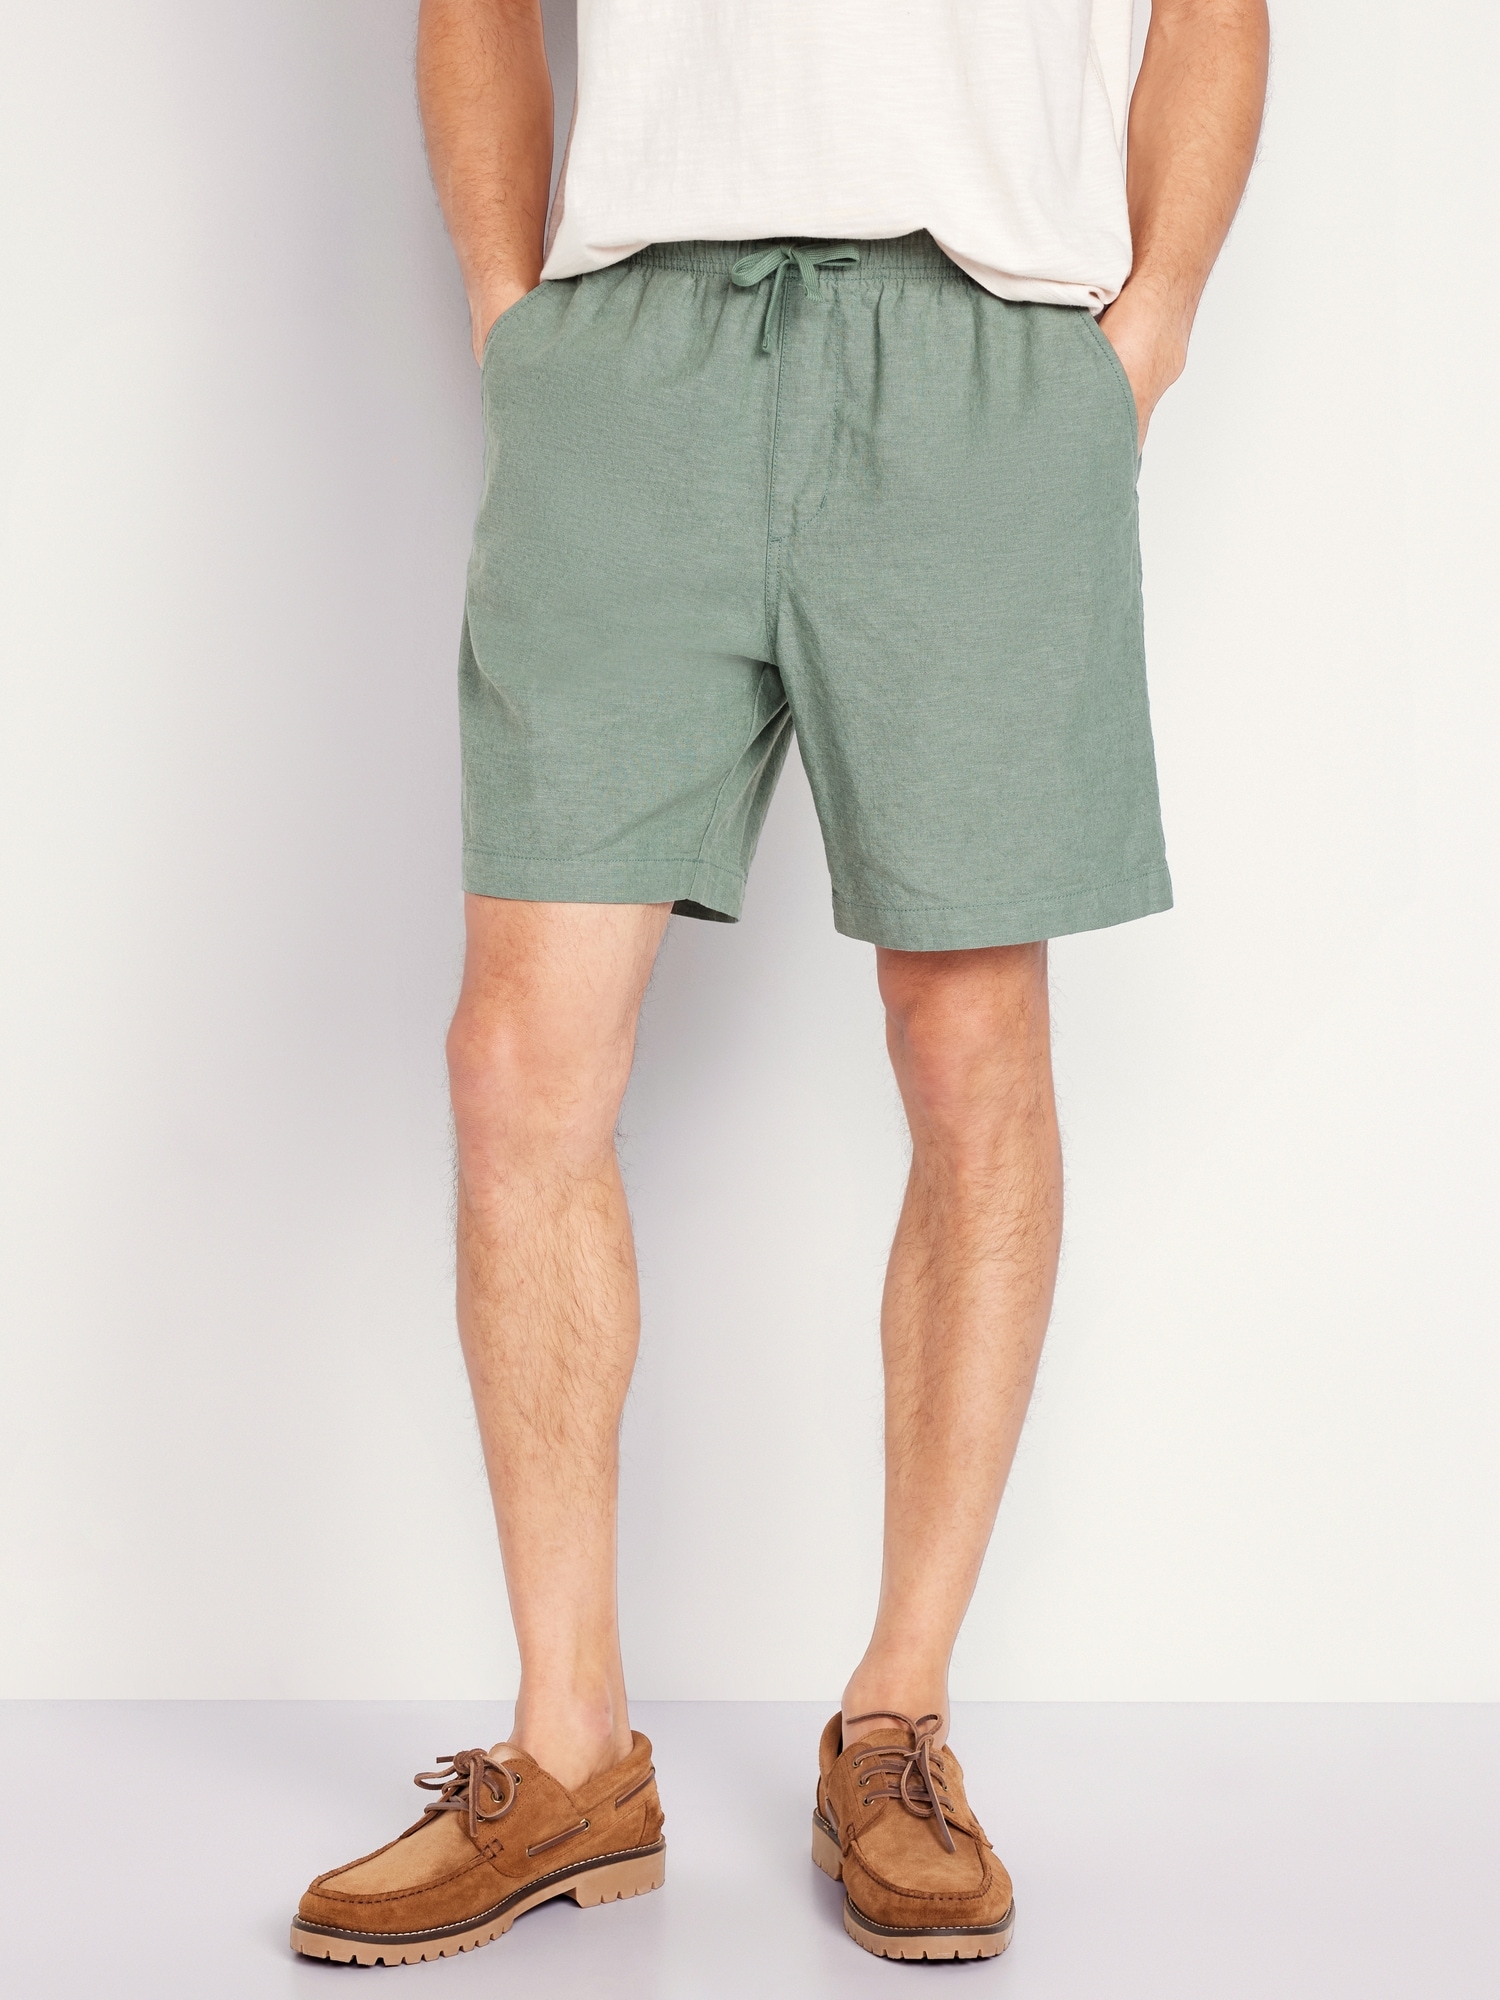 Men's Lounge Shorts with Pockets